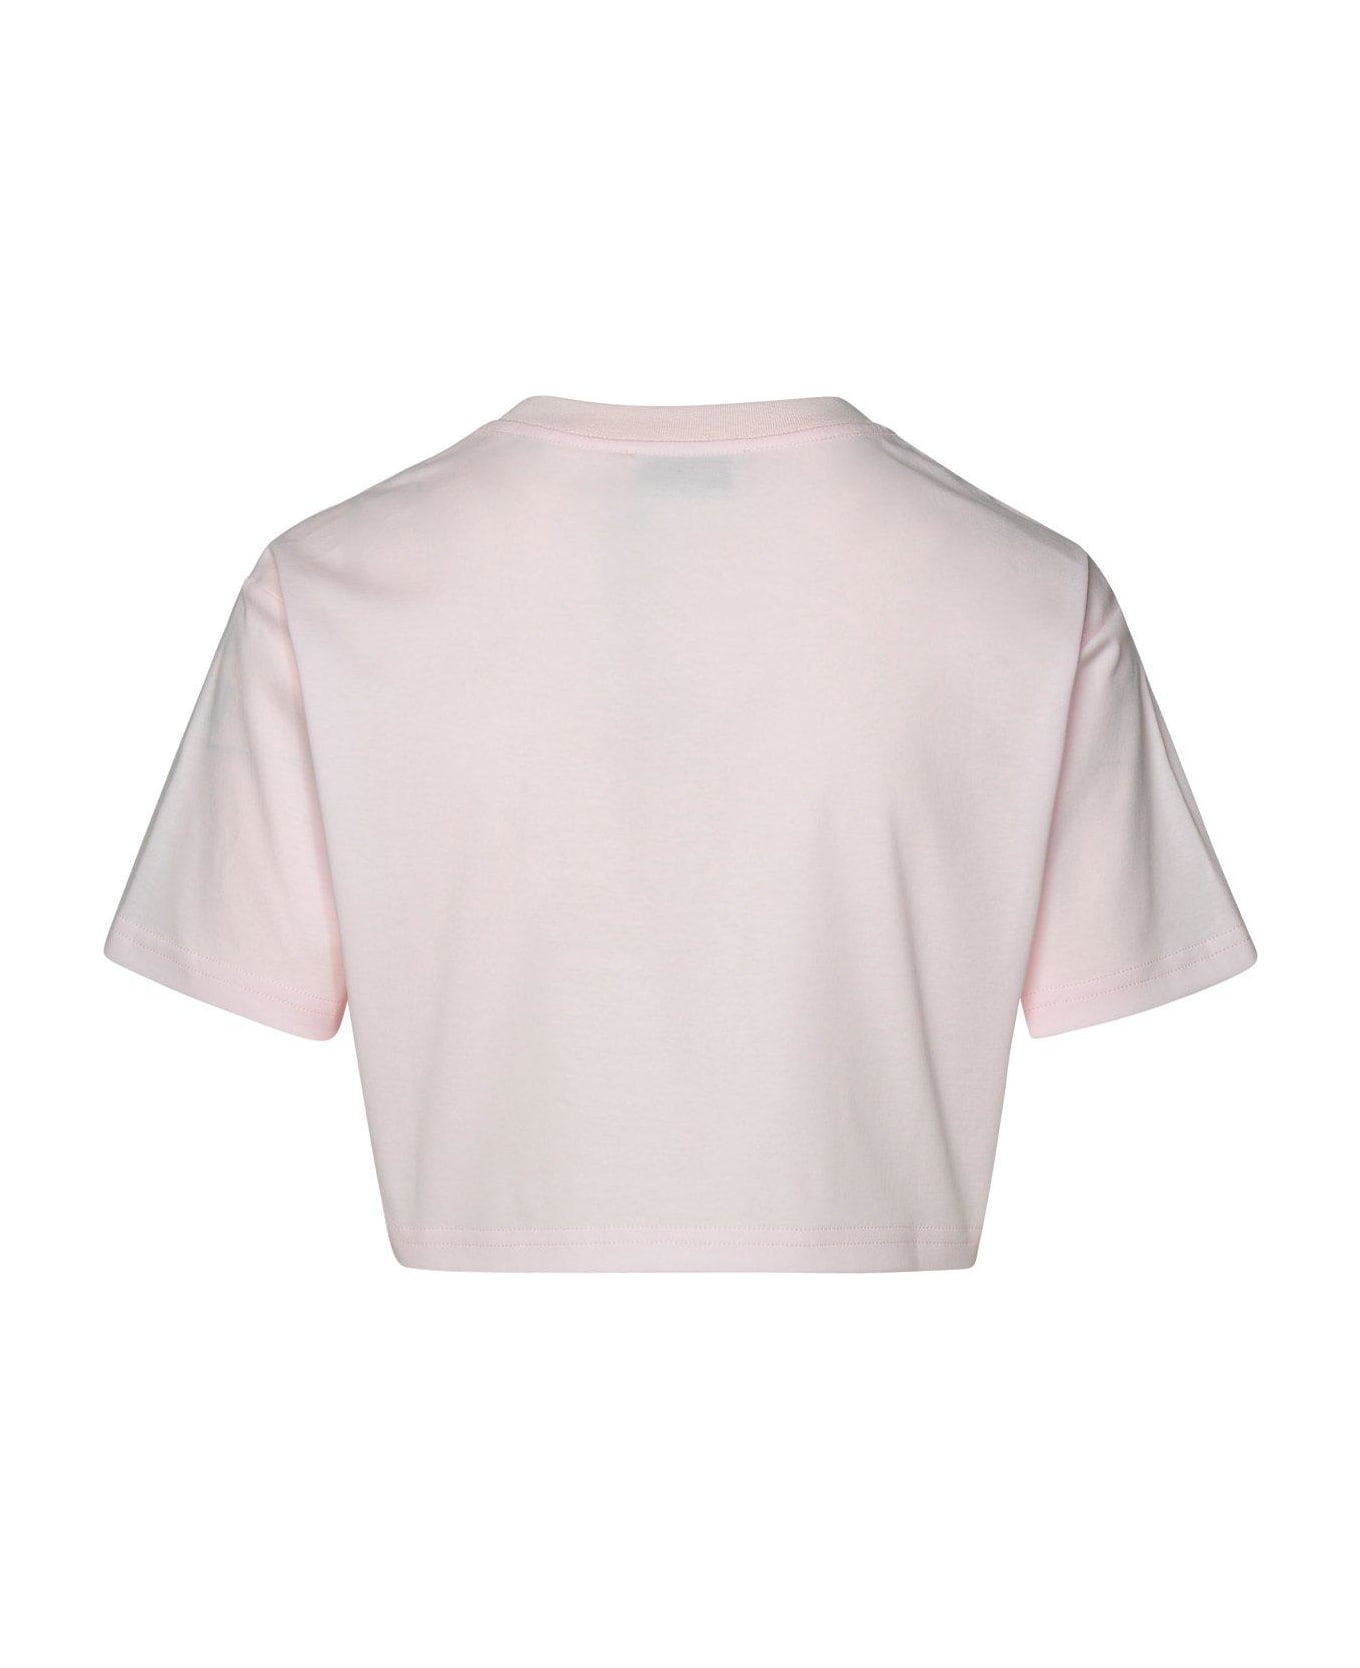 Lanvin Logo Embroidered Cropped T-shirt